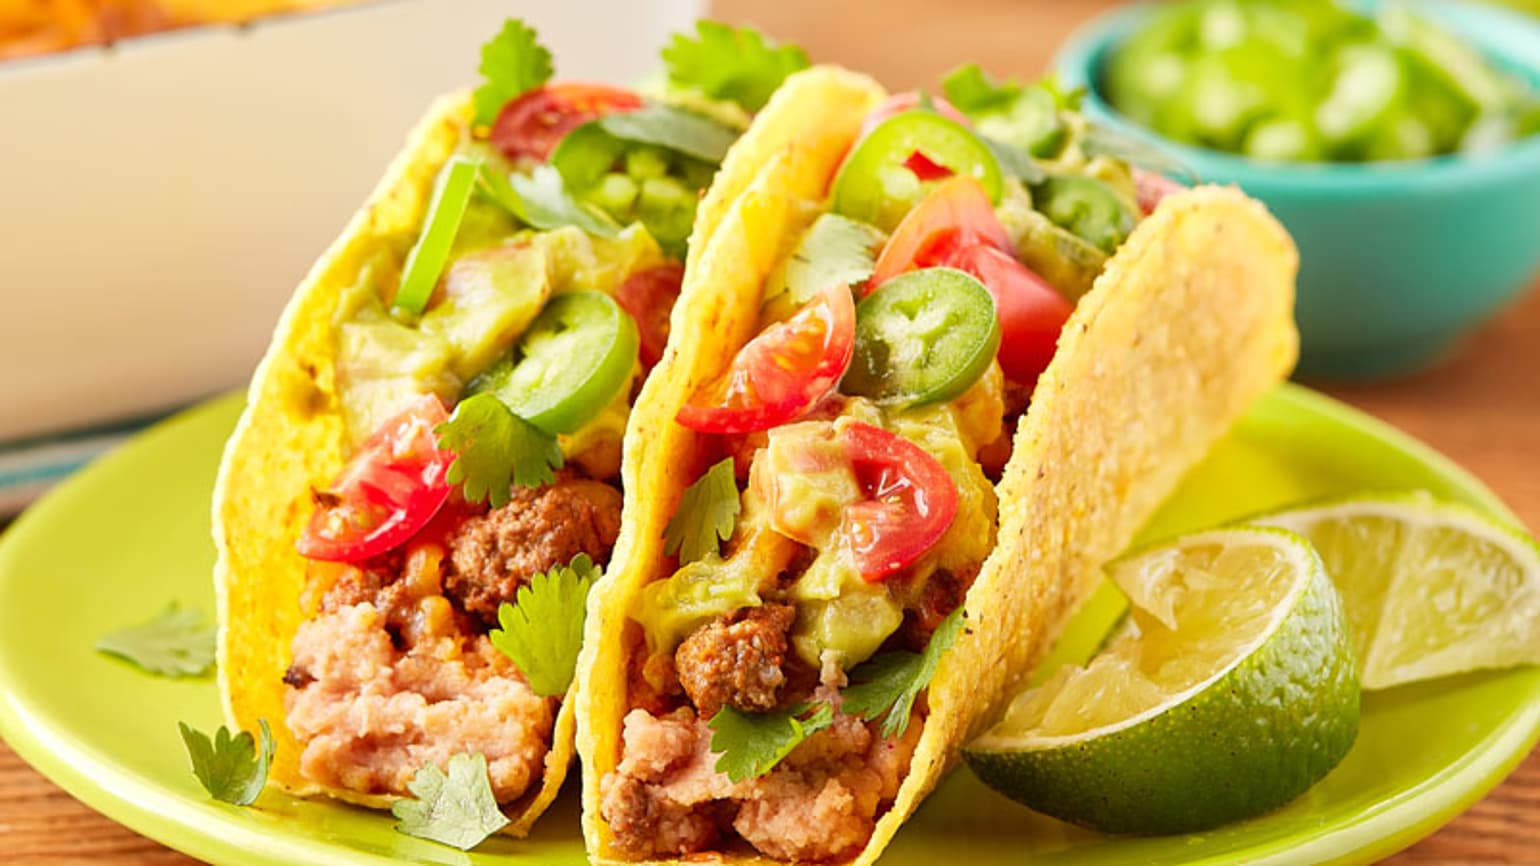 Easy Oven-baked Beef Tacos